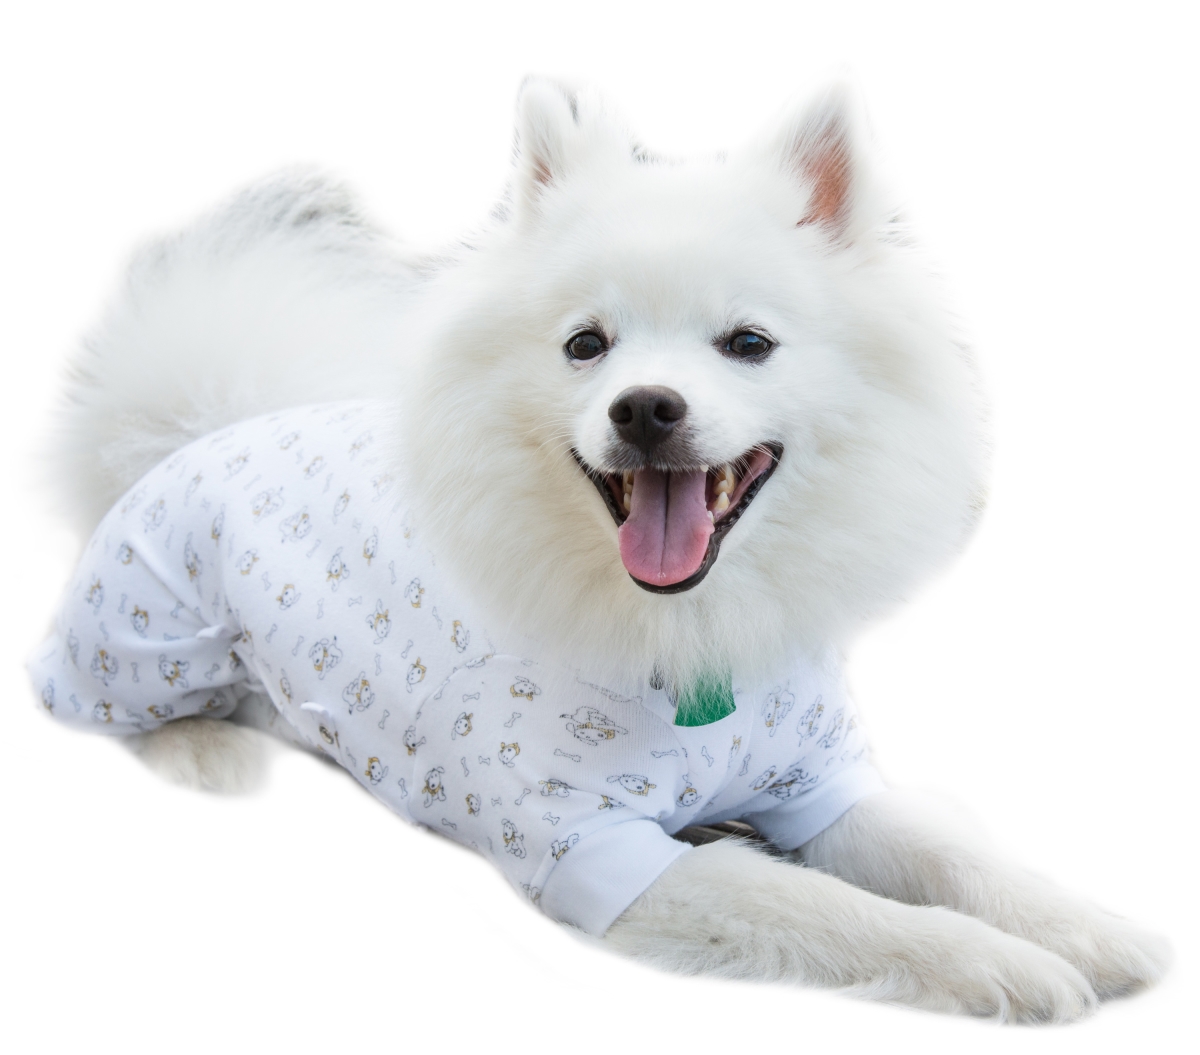 Xs Adj Fit Pullover Ss Pup Prin Adjustable Fit Puppy Print Pullover With Short Sleeve For Pets - Extra Small